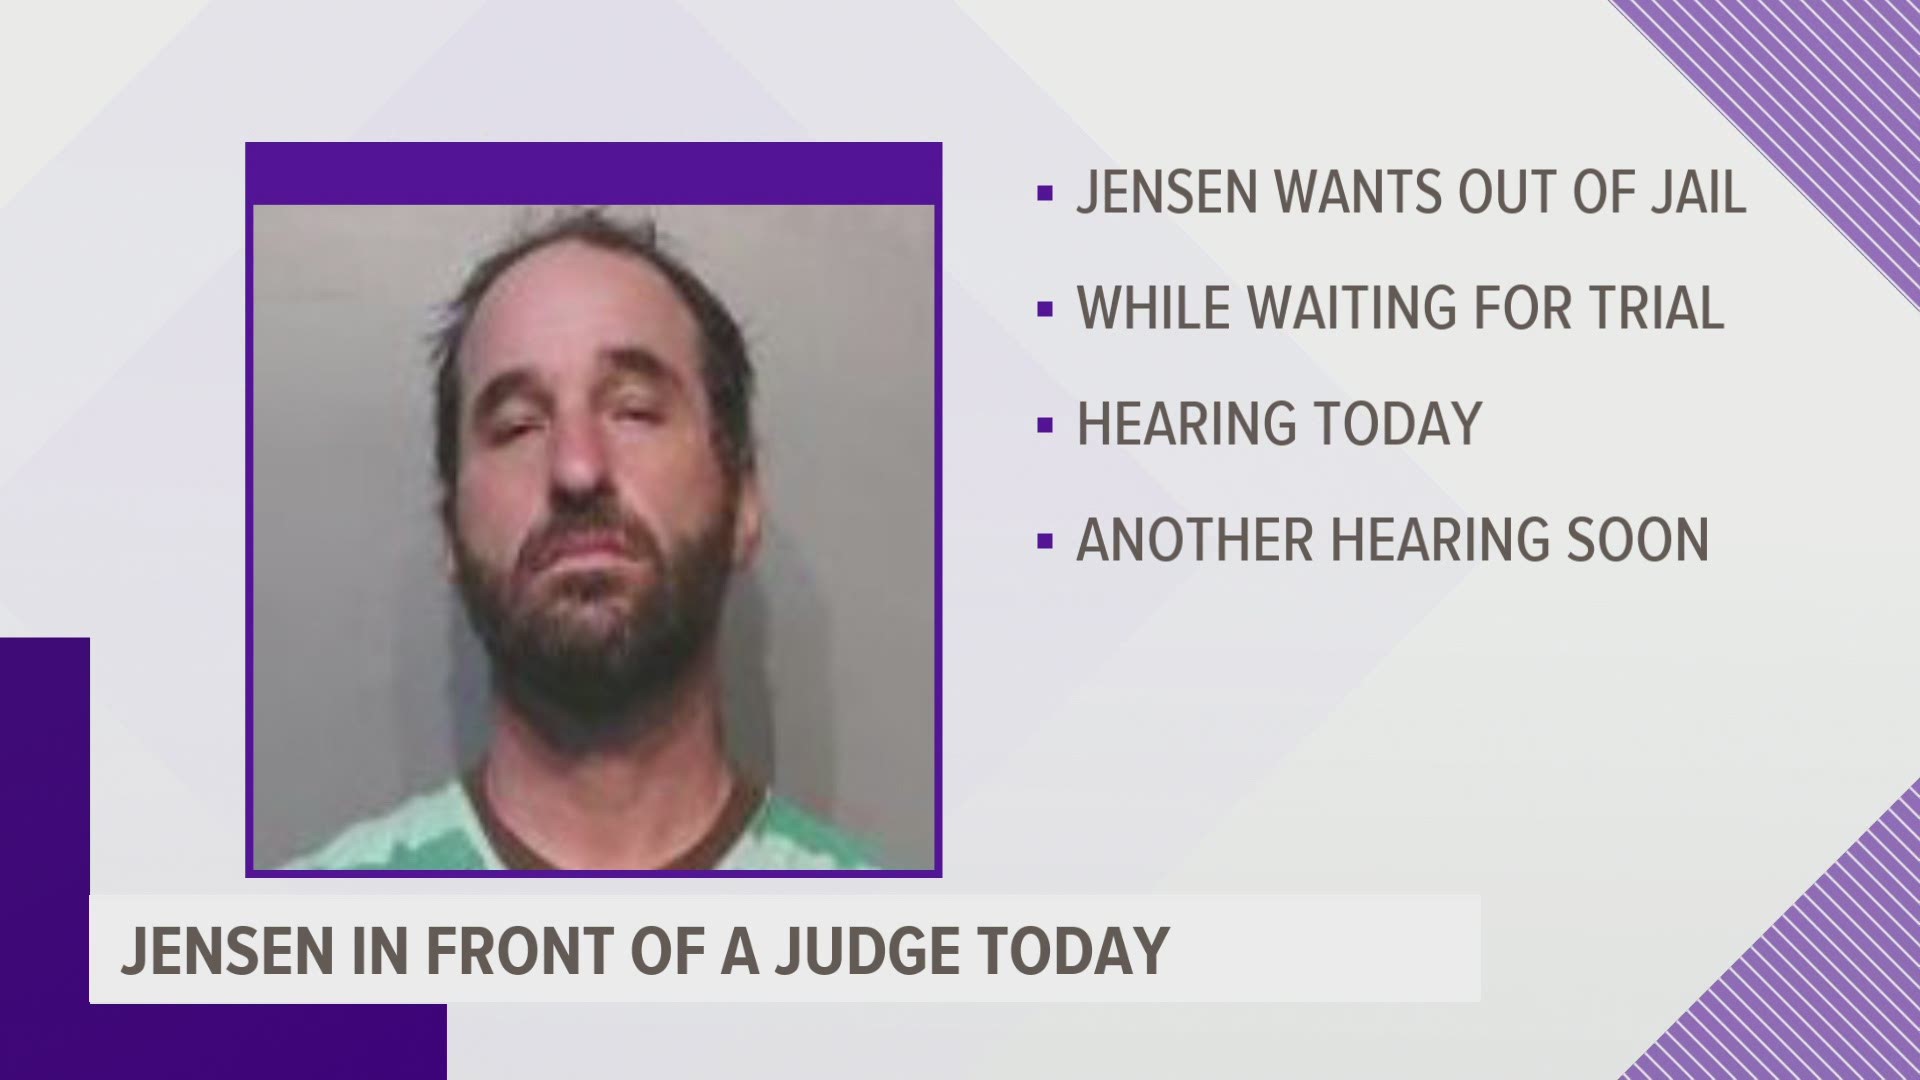 An attorney for Jensen has asked the court for pretrial release, citing the "lies" he believed in on Jan. 6.